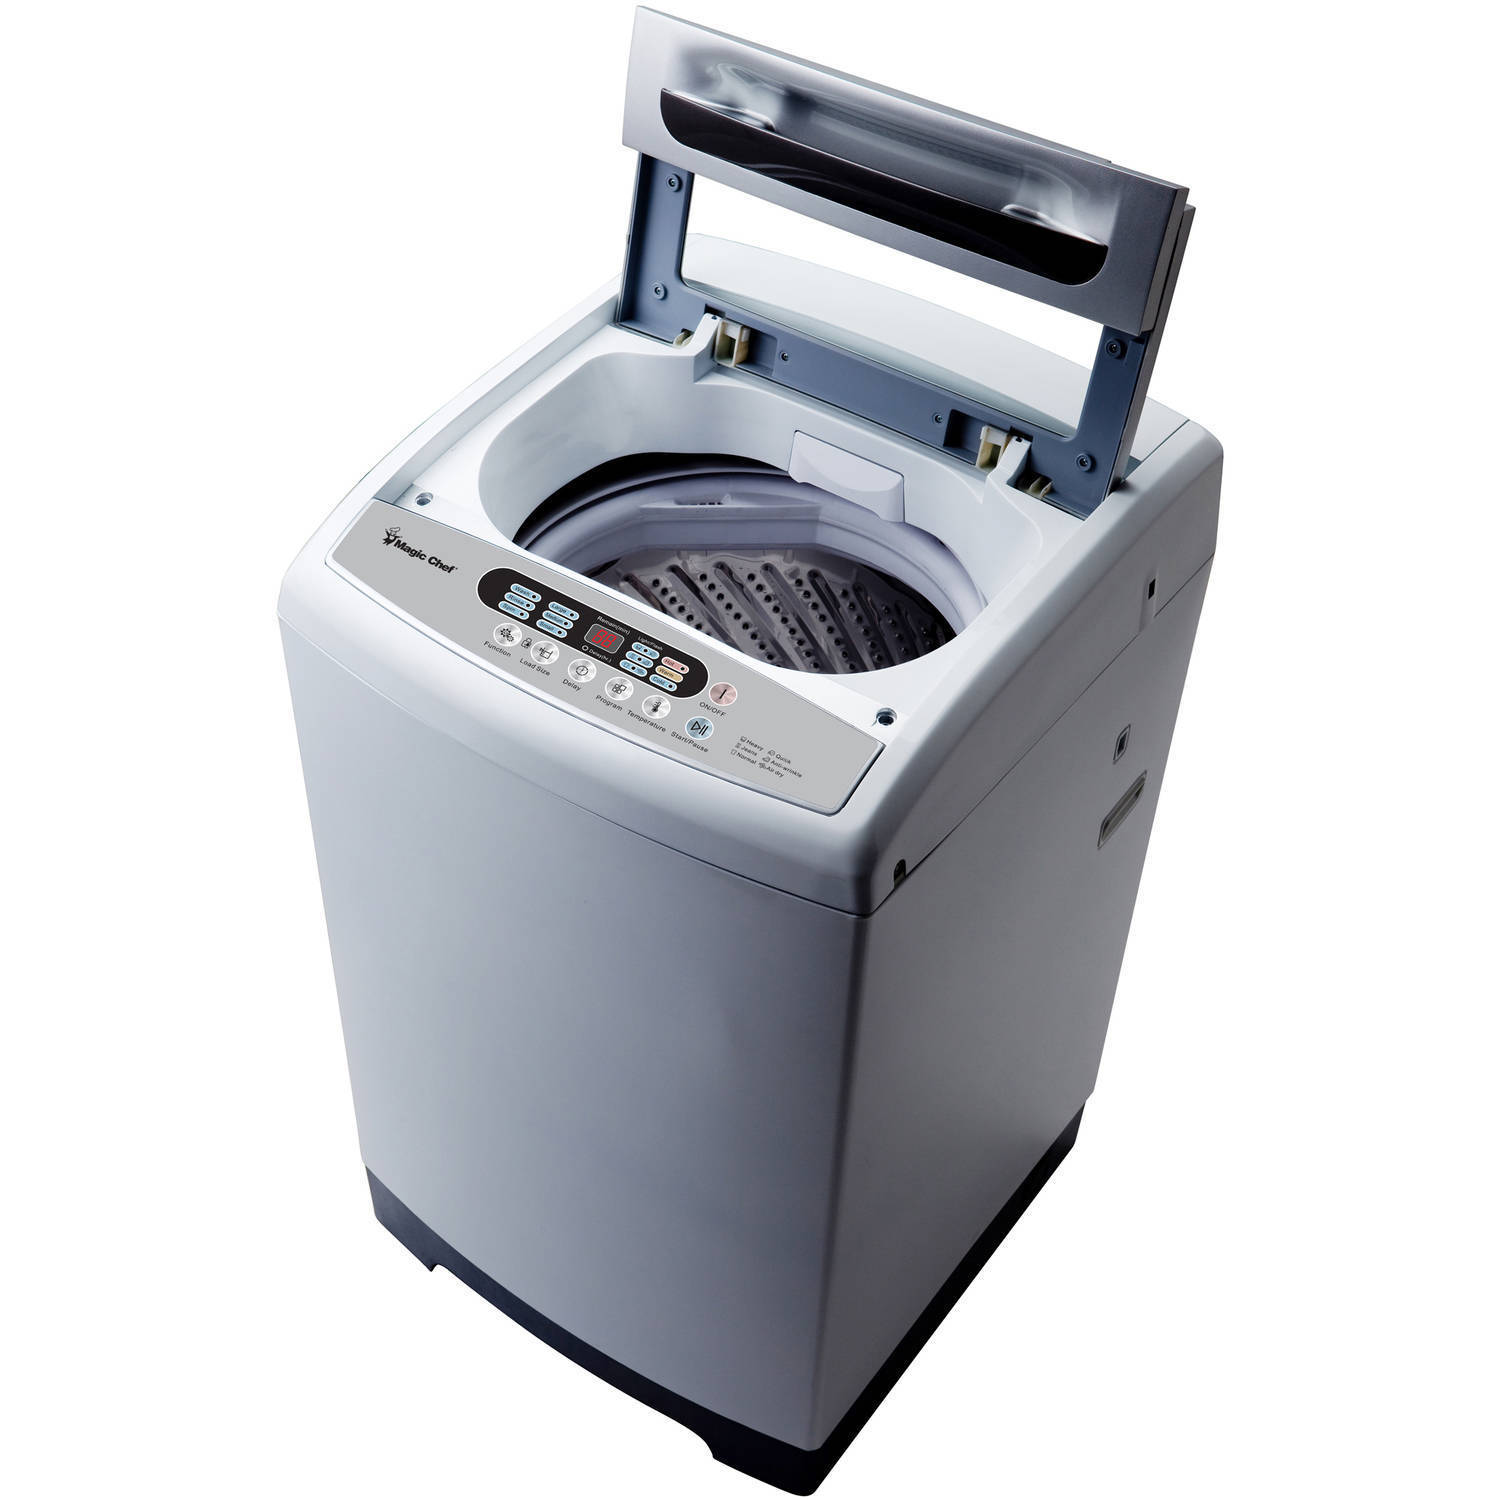 Magic Chef 1.6 cu. ft. Top Load Portable Washer - image 1 of 3